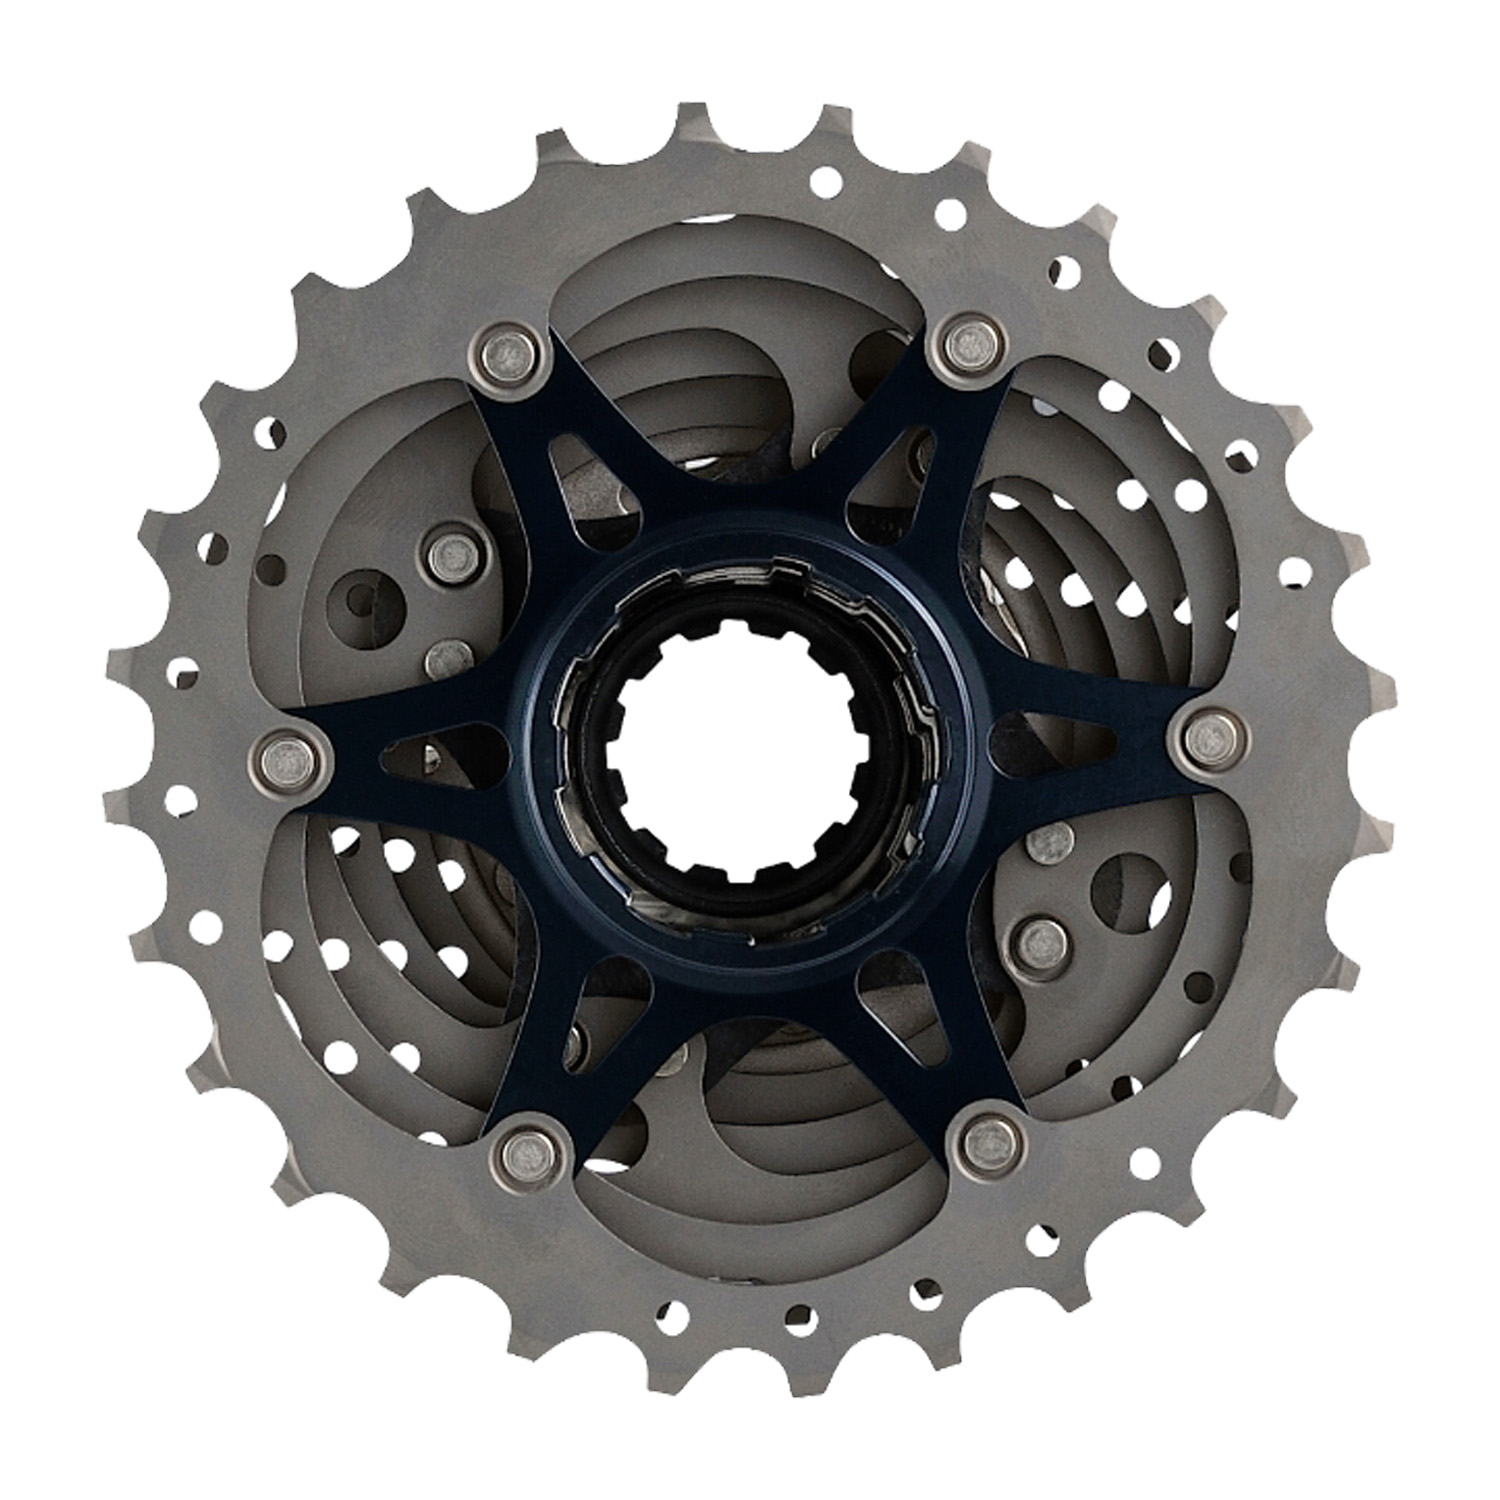 Shimano Dura Ace R9100 11-speed cassette